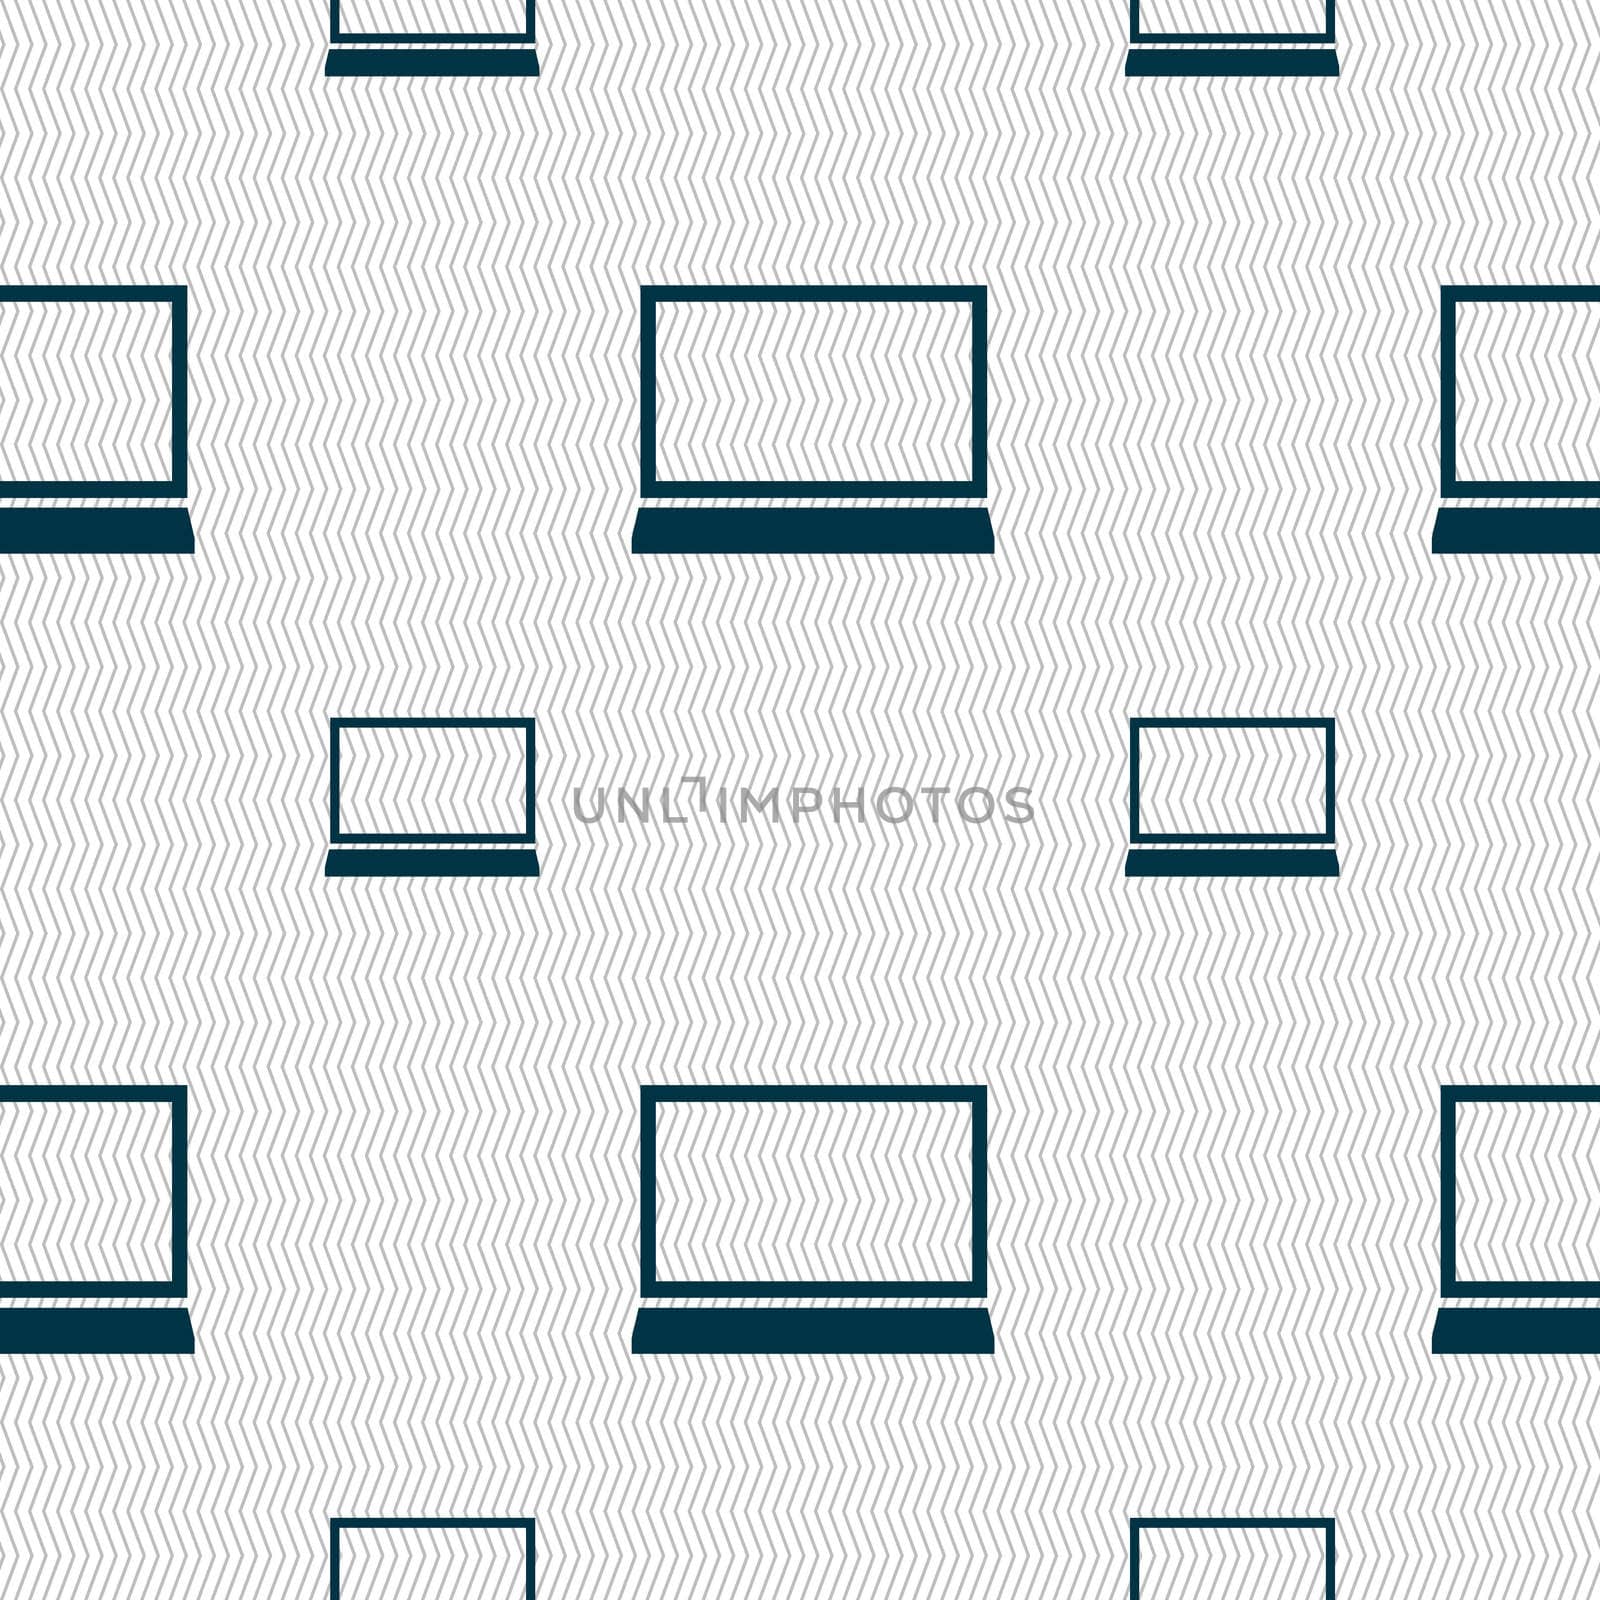 Laptop sign icon. Notebook pc symbol. Seamless pattern with geometric texture. illustration